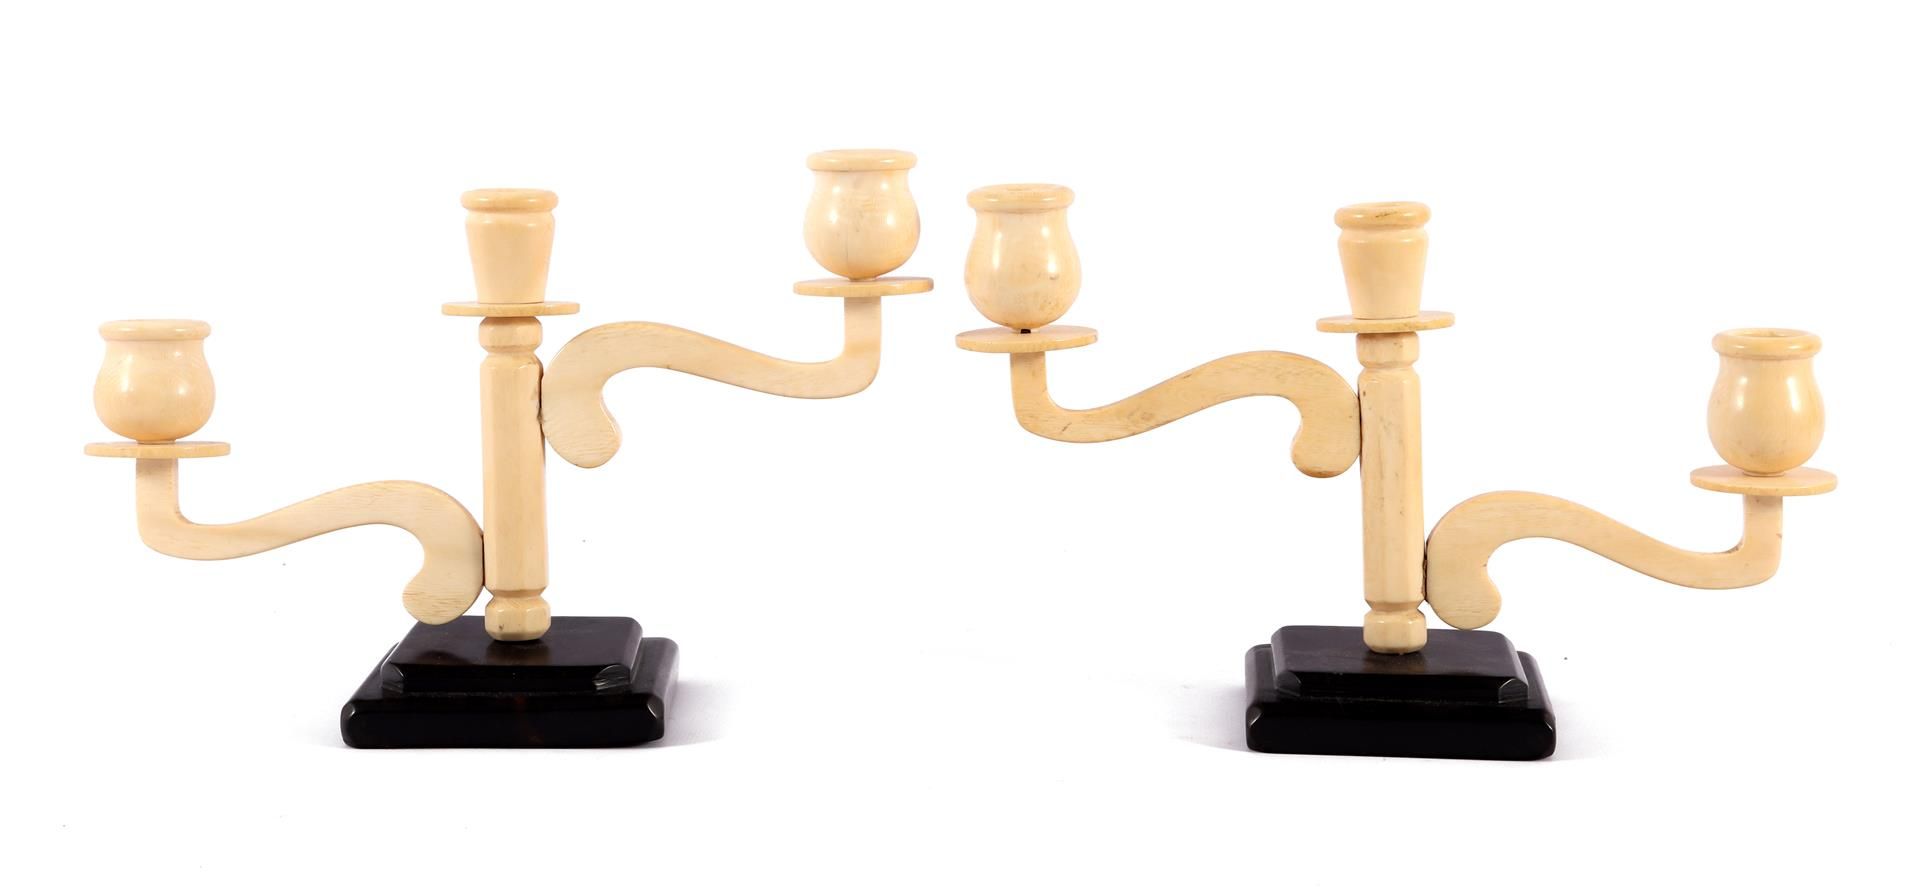 2 Art Deco ivory 3-light table candlesticks on a wooden base